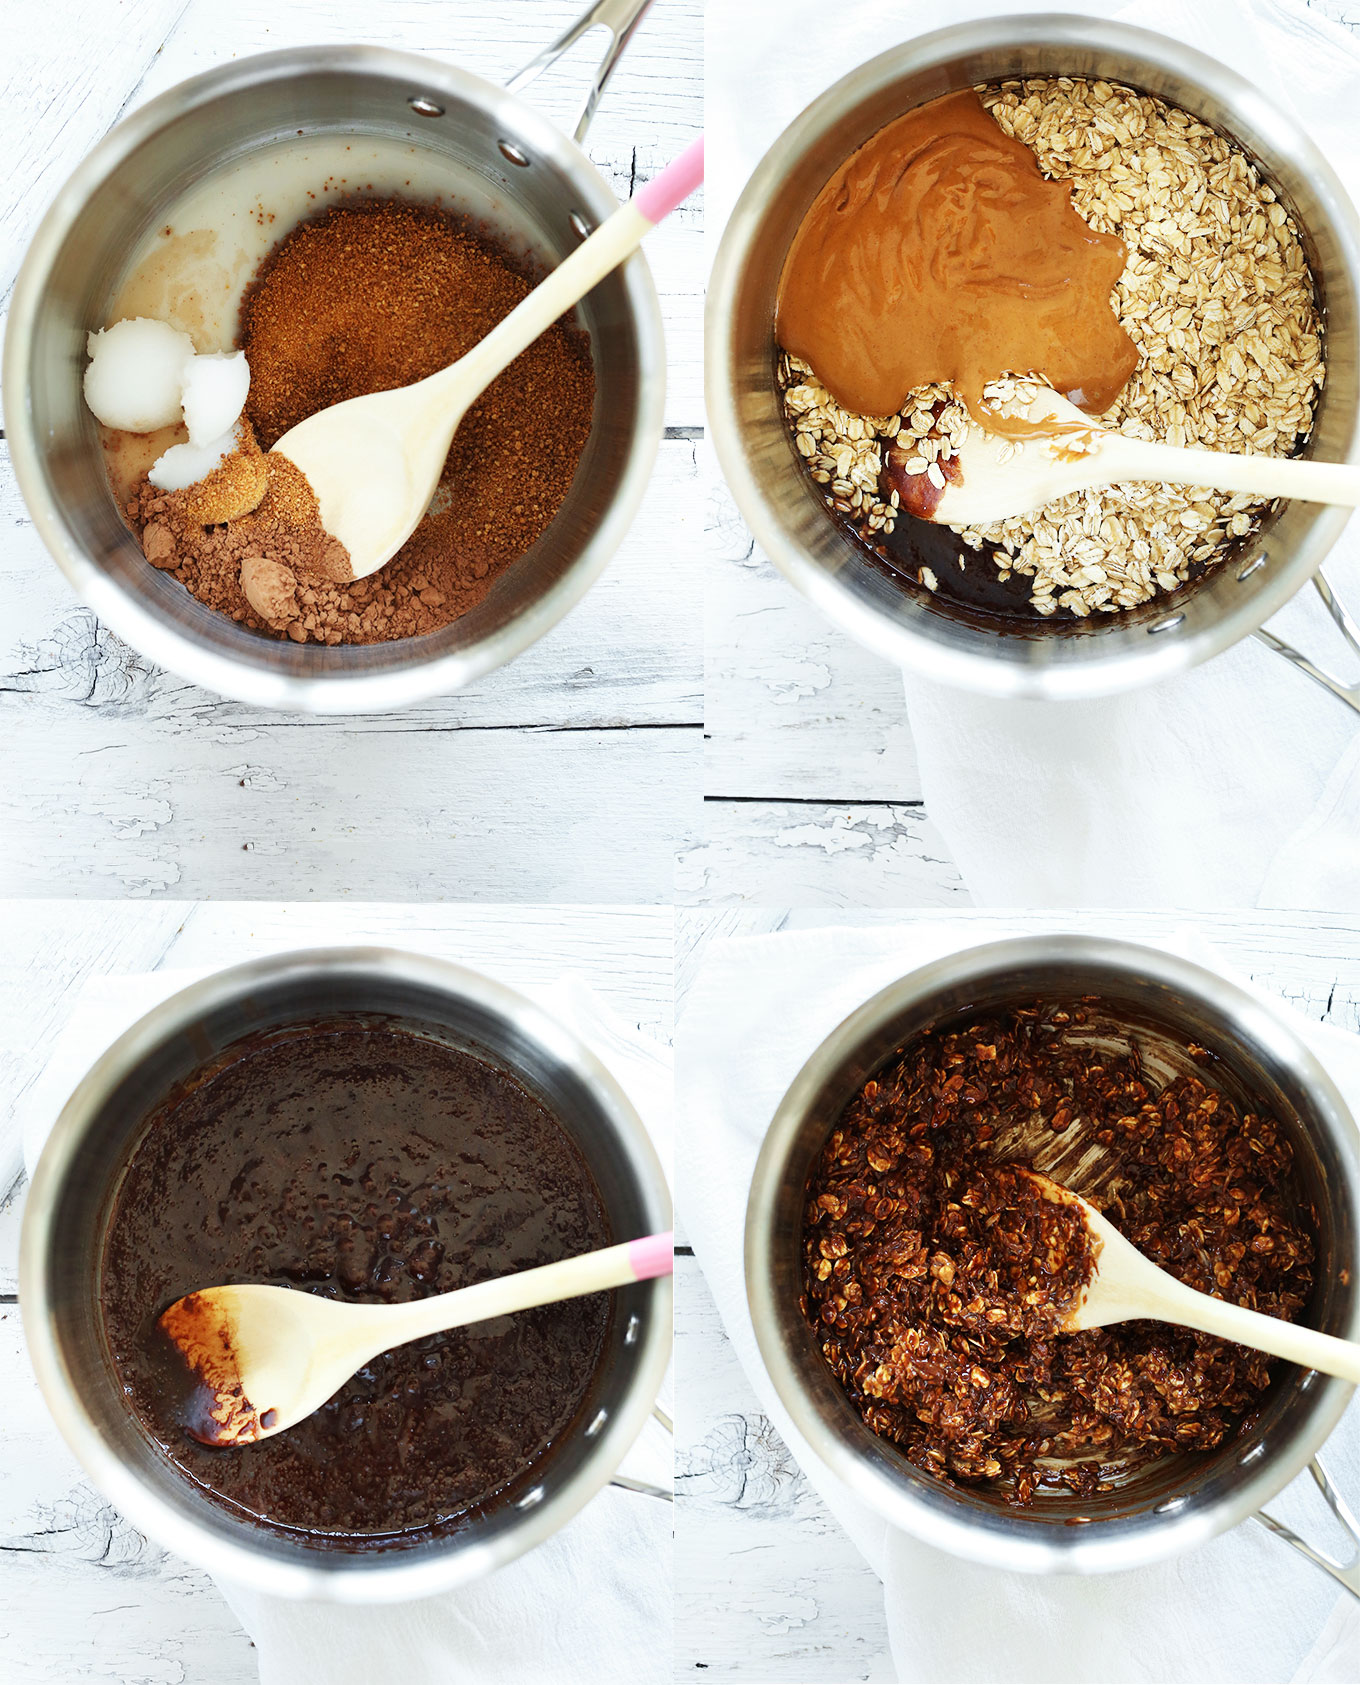 Photos showing the addition of ingredients to a saucepan for our No-Bake Cookies recipe